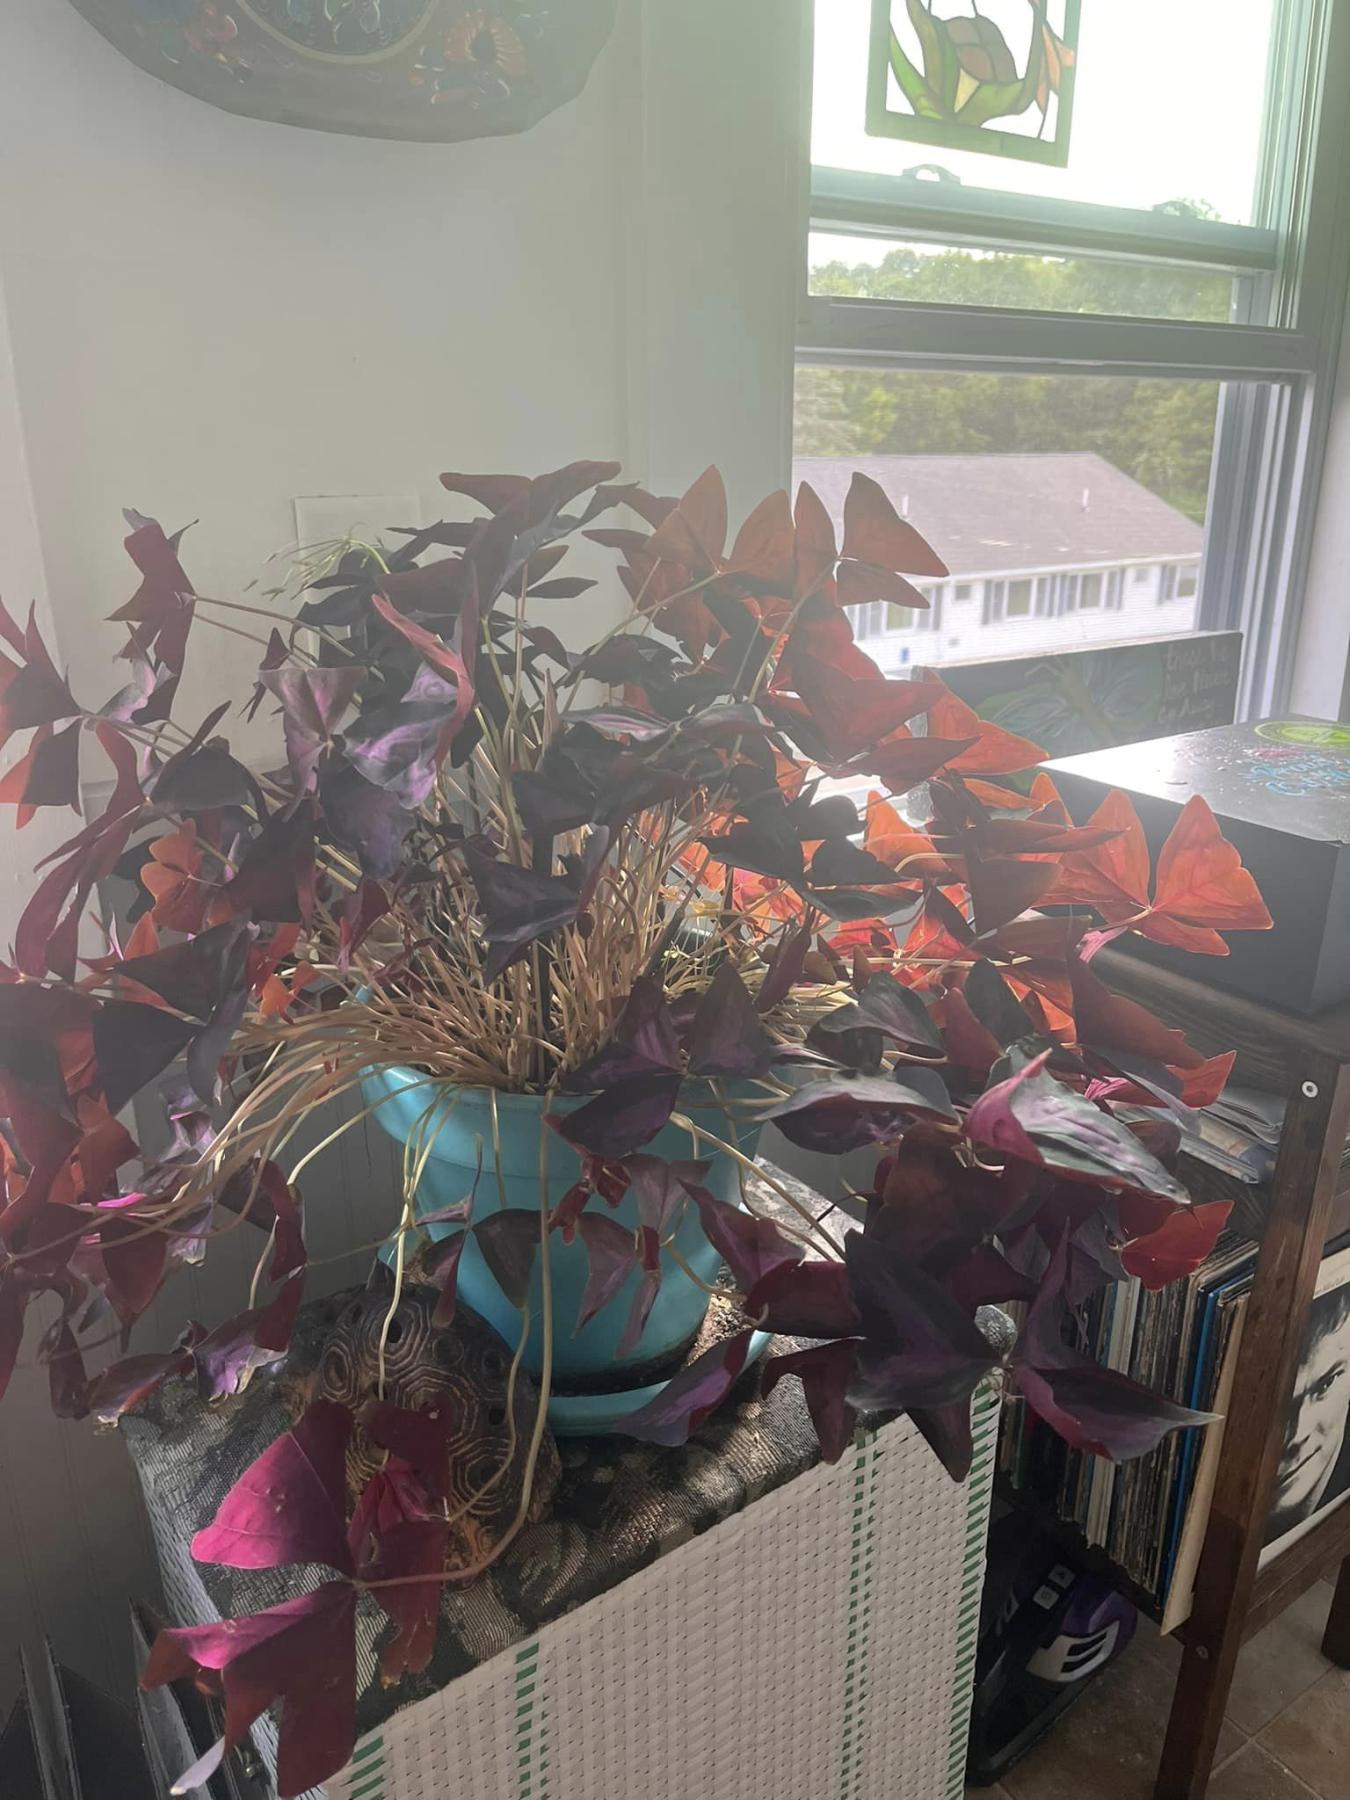 A large purple Oxalice plant sits in a sunny window